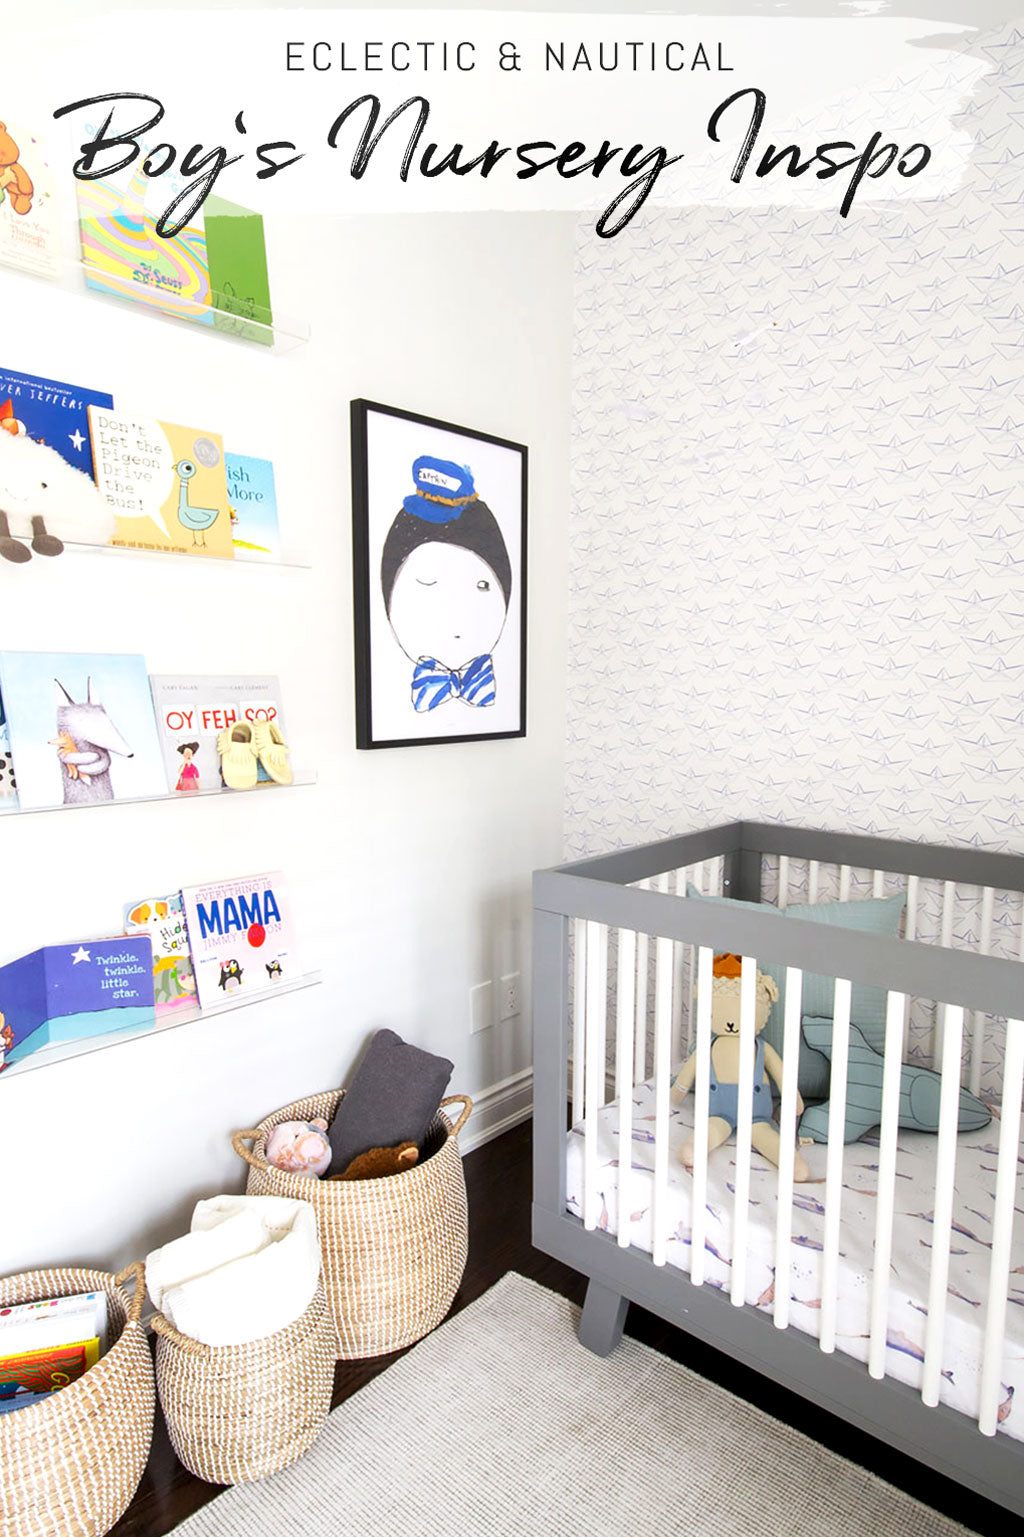 Modern and bright baby nursery interior with coastal nautical style and colorful eclectic interior decor